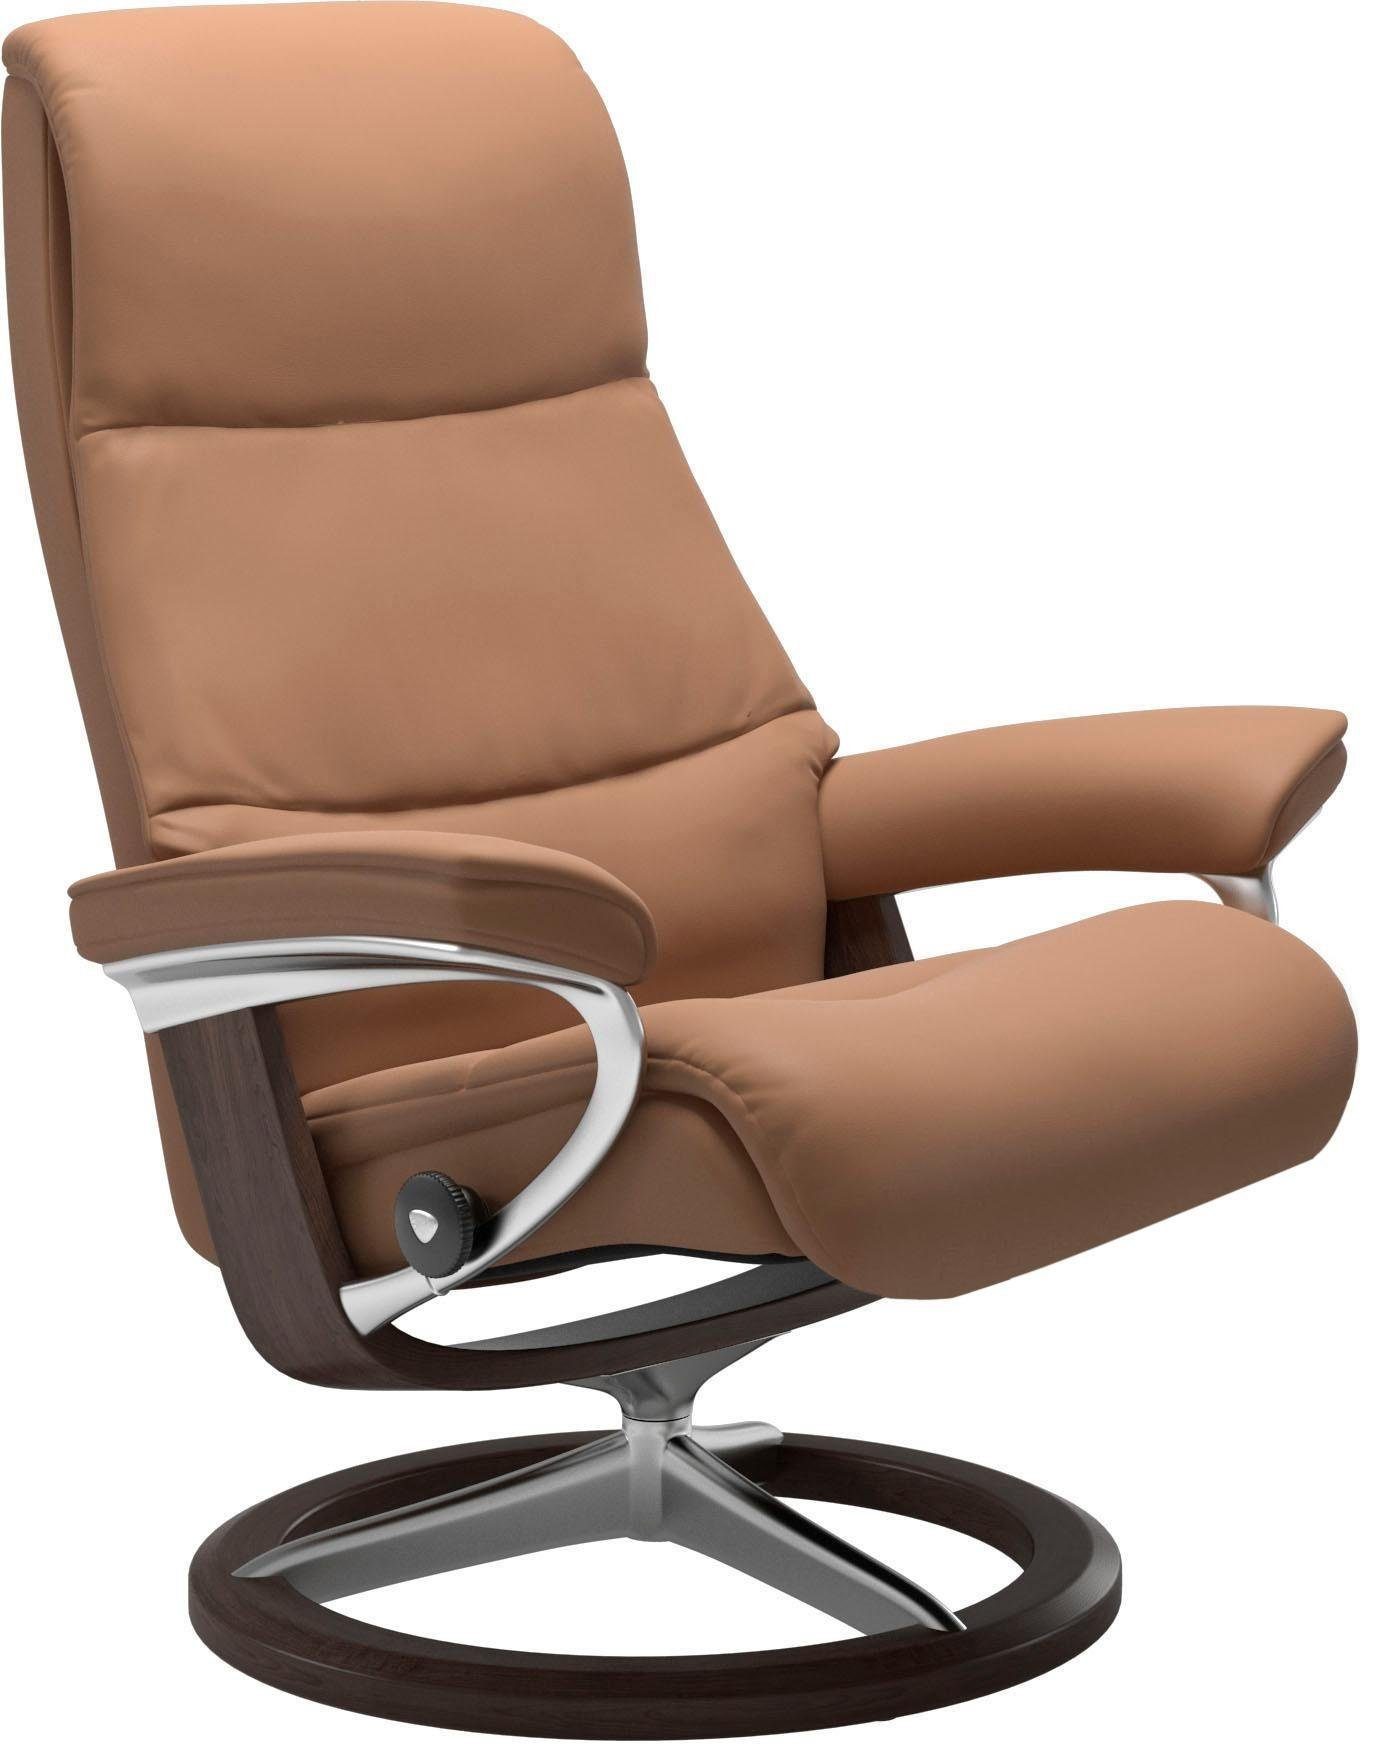 mit Größe S,Gestell Stressless® View, Base, Wenge Relaxsessel Signature